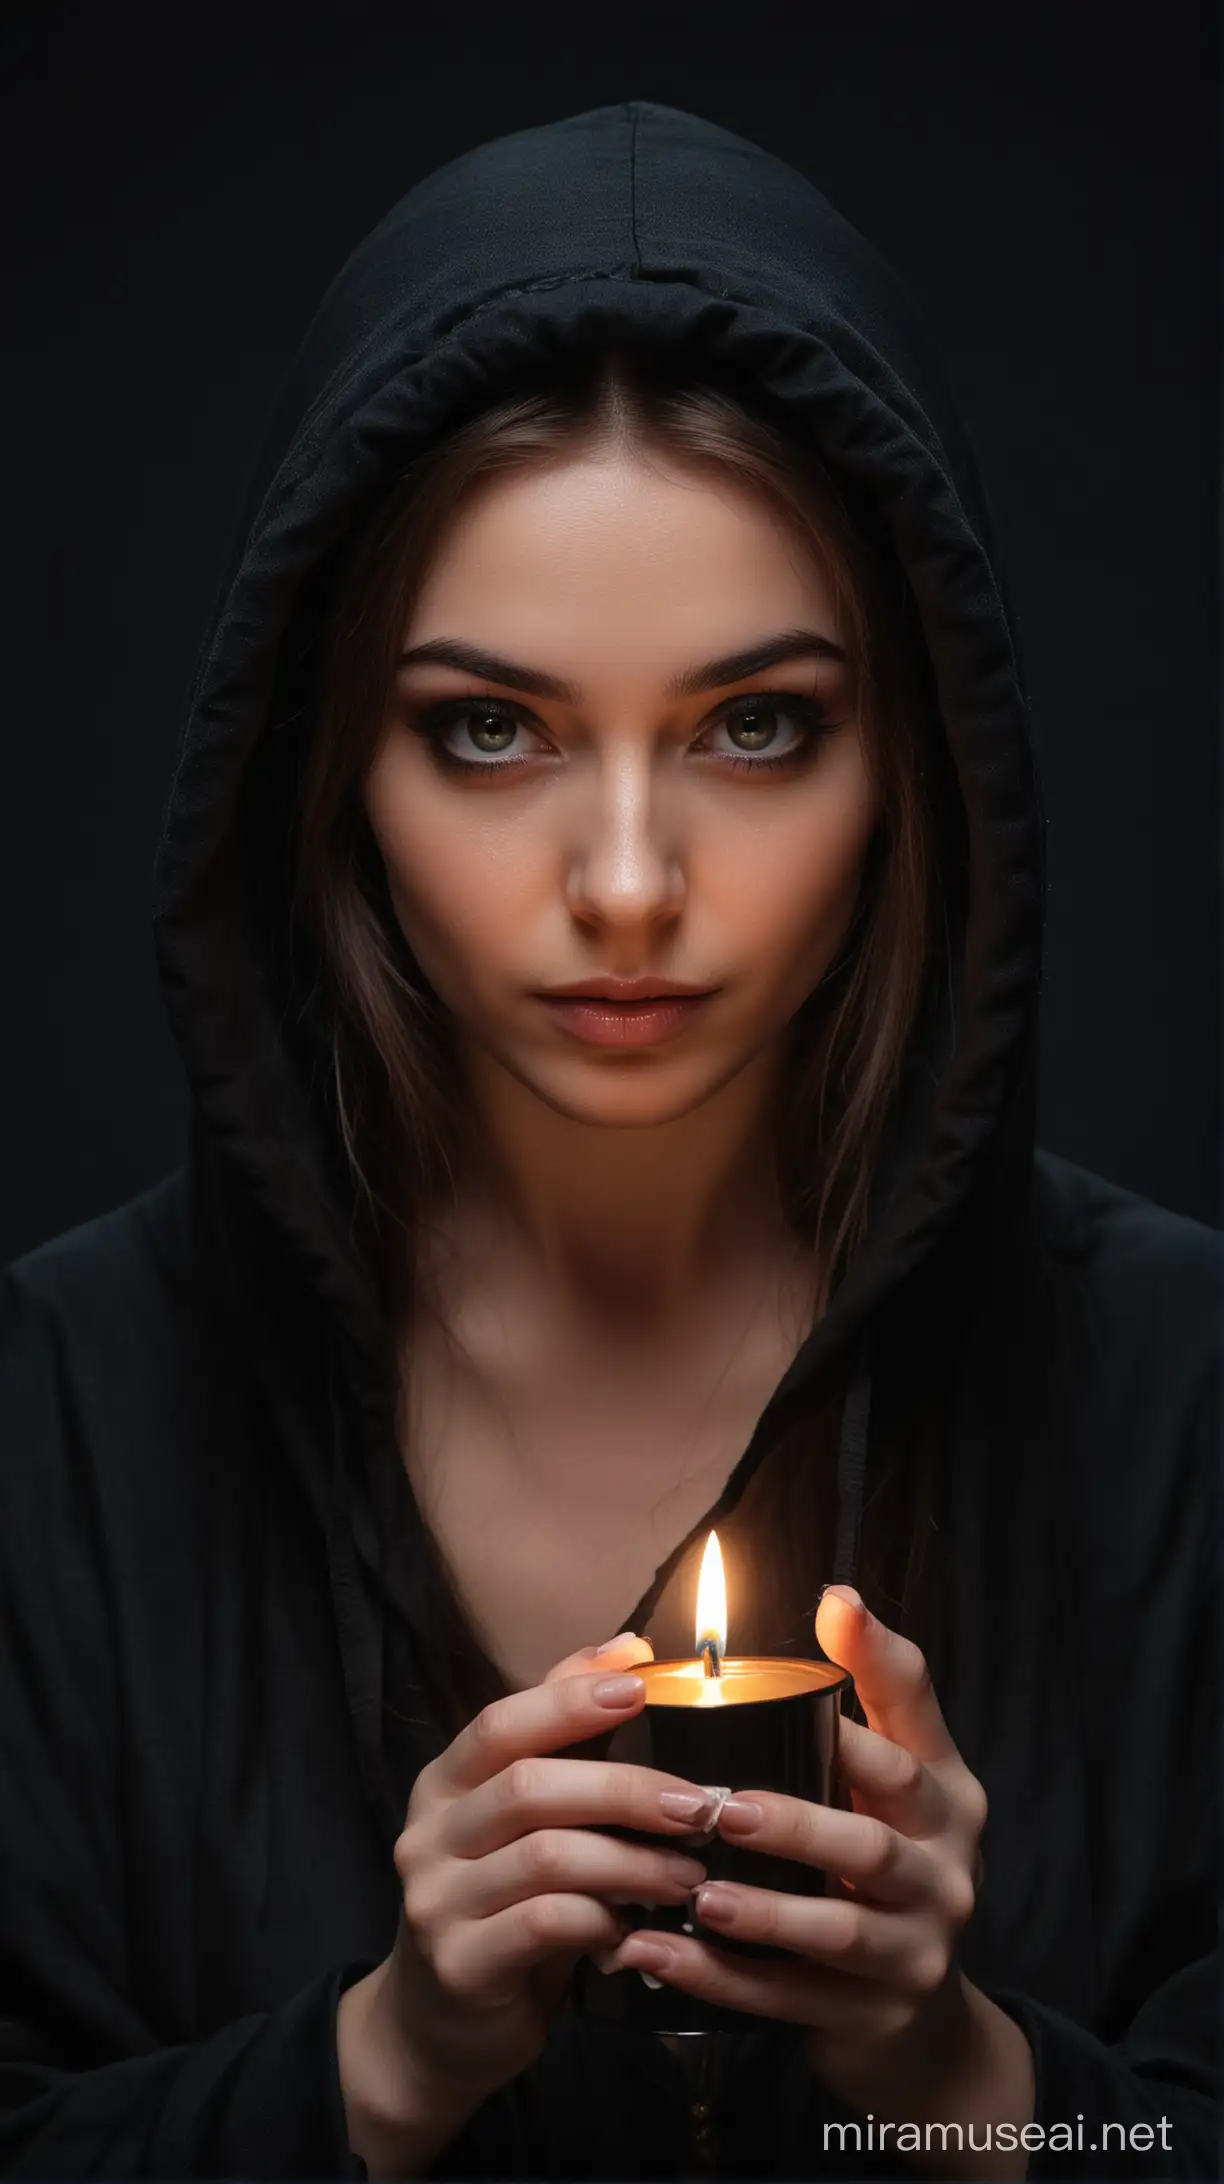 Enigmatic Witch Holding Candle in the Dark